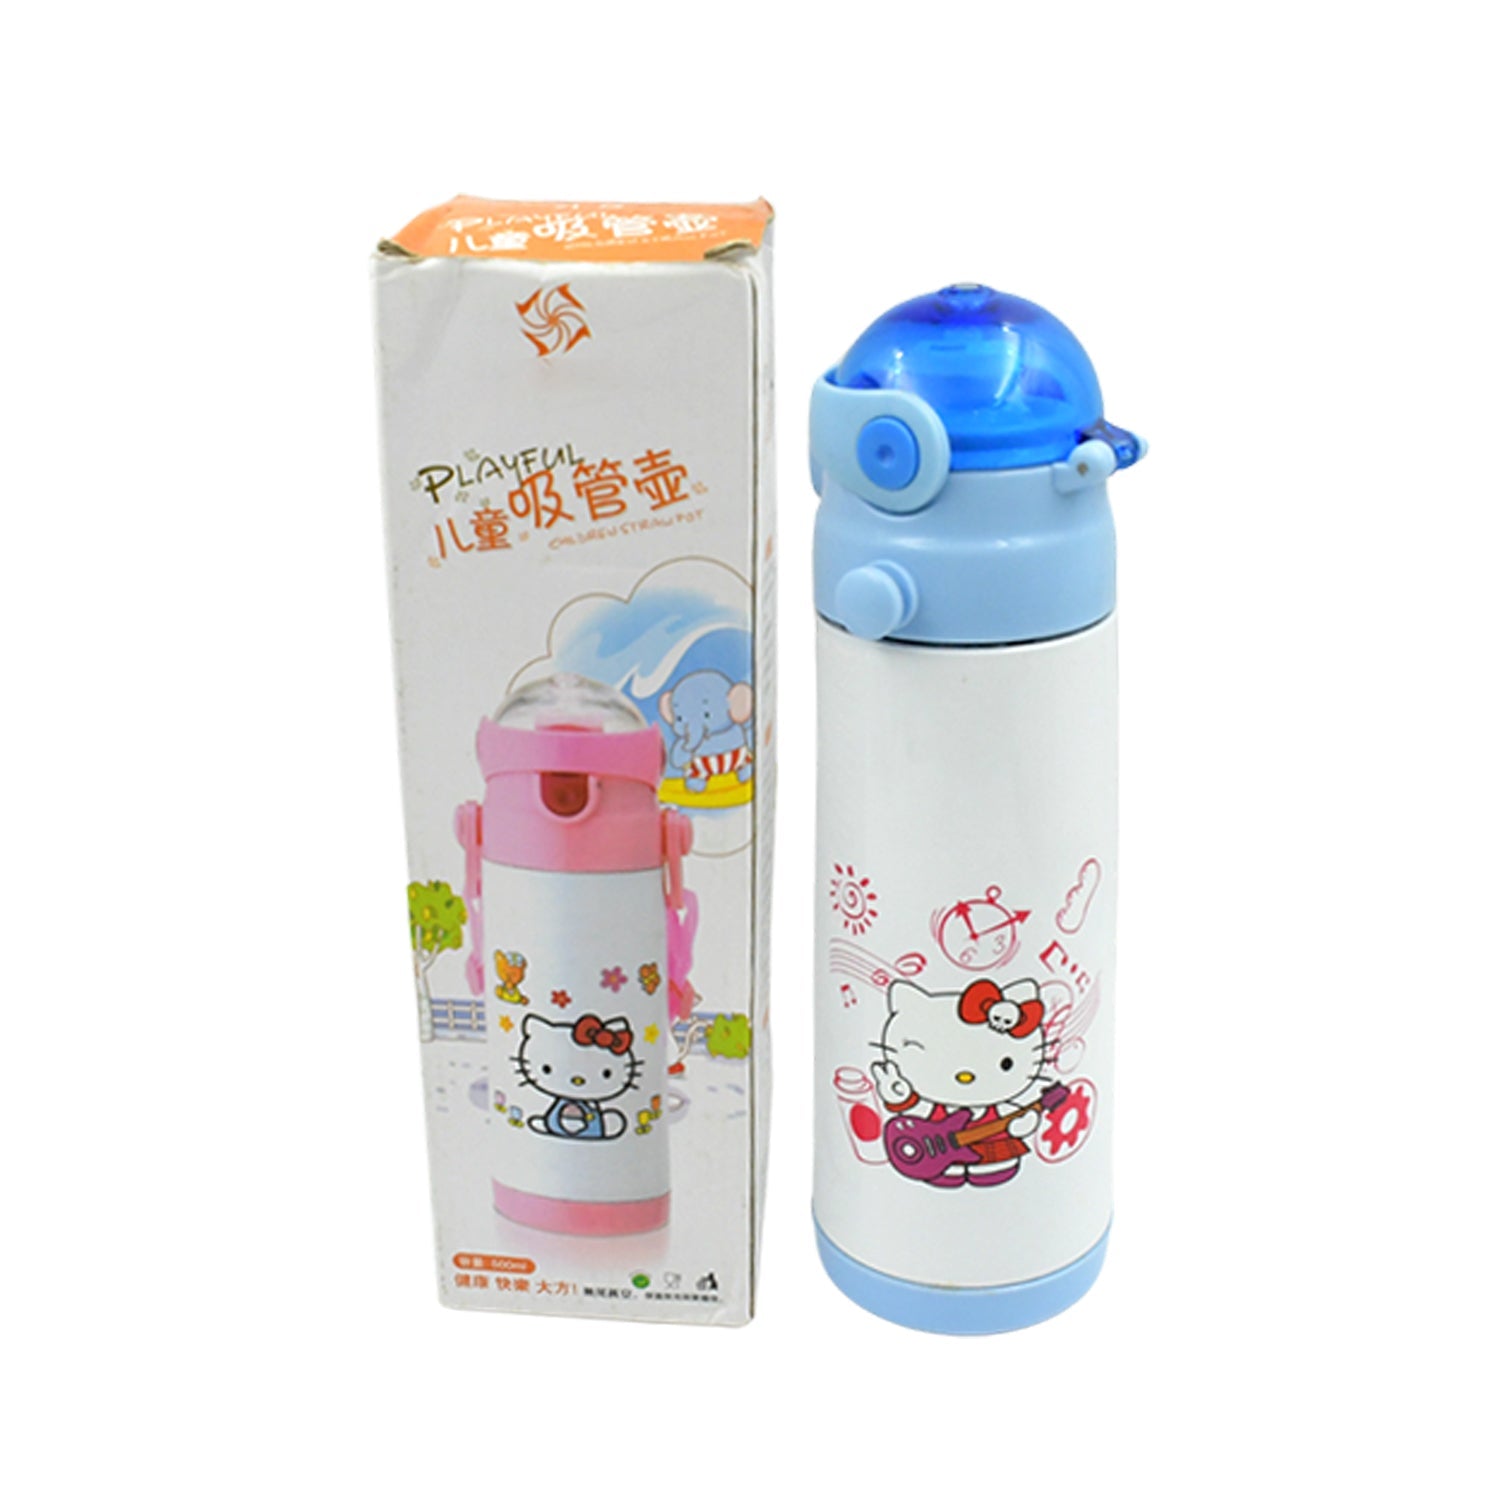 8373 Stainless Steel Vacuum Flask Insulated Water Bottle Specially Designed Push Button Sipper Water Bottle with Soft Straw and Neck Strap, For Sports And Travel , STAINLESS STEEL SPORTS WATER BOTTLES, STEEL FRIDGE BOTTLE FOR OFFICE/GYM/SCHOOL (500ML)